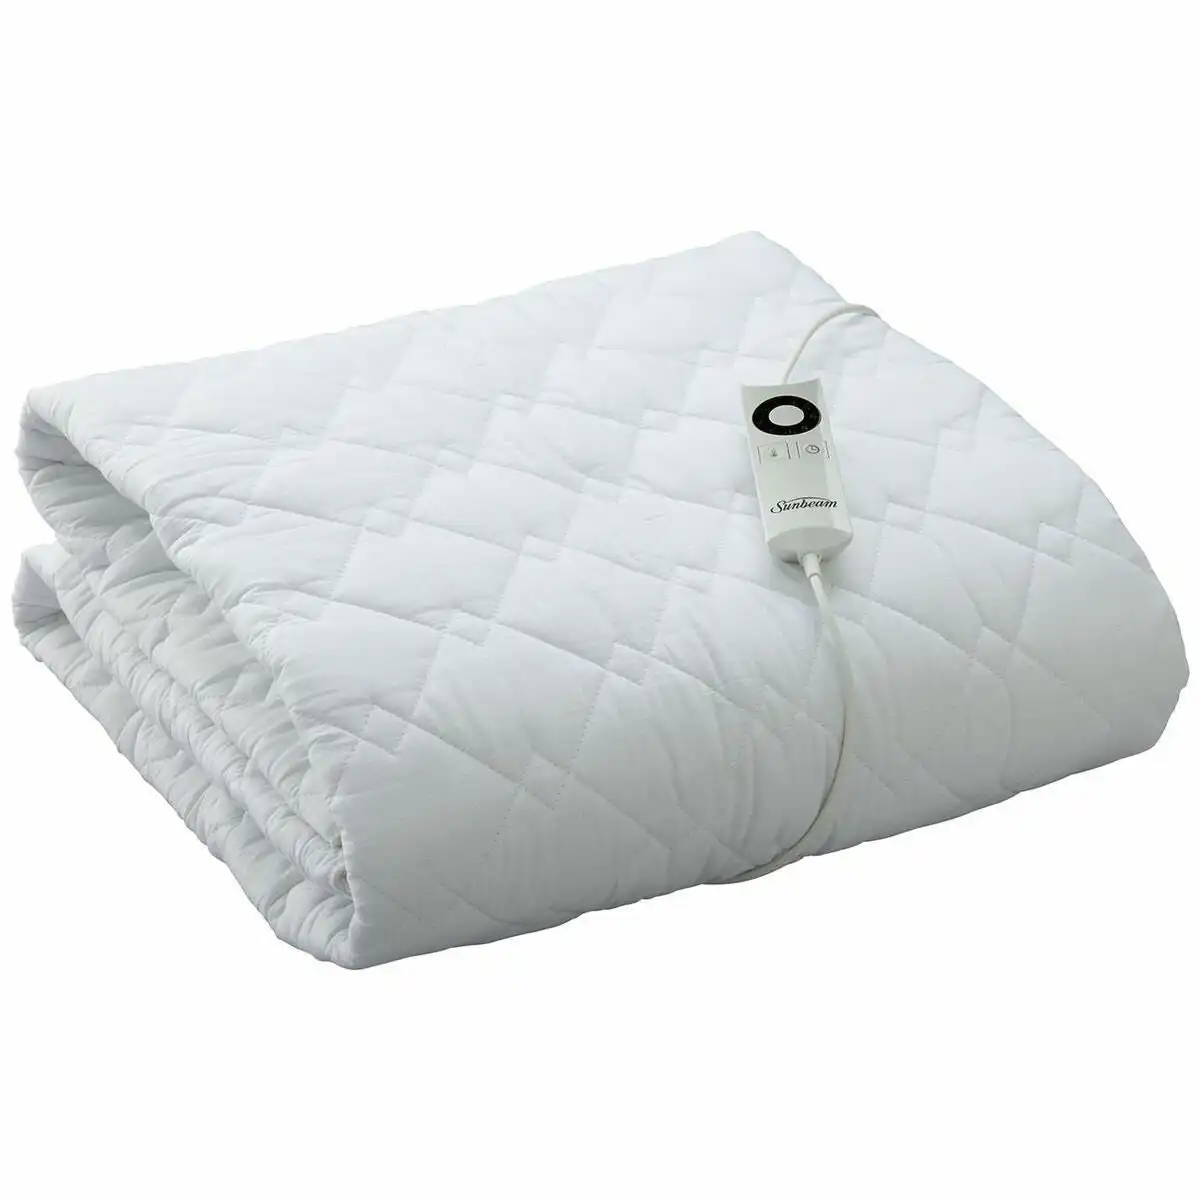 Sunbeam Sleep Perfect Quilted Electric Blanket Single